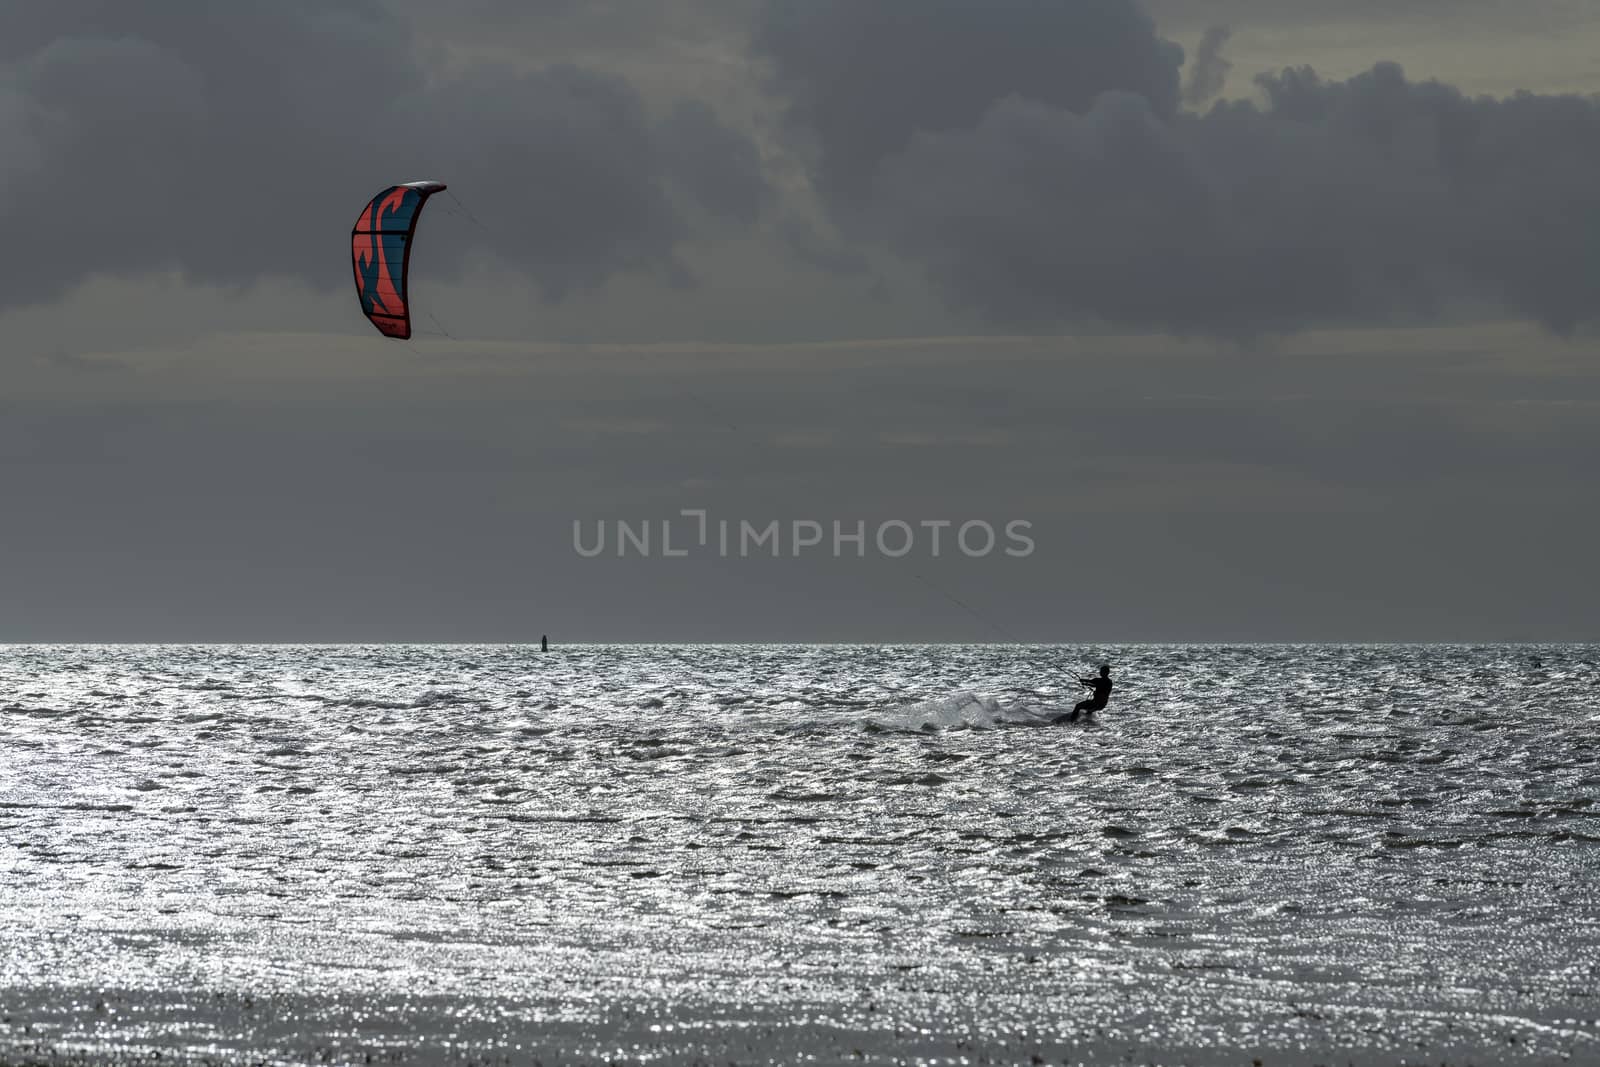 Sports kite surfer in the evening sun on the Wadden Sea near the island of Terschelling in the North of the Netherlands
